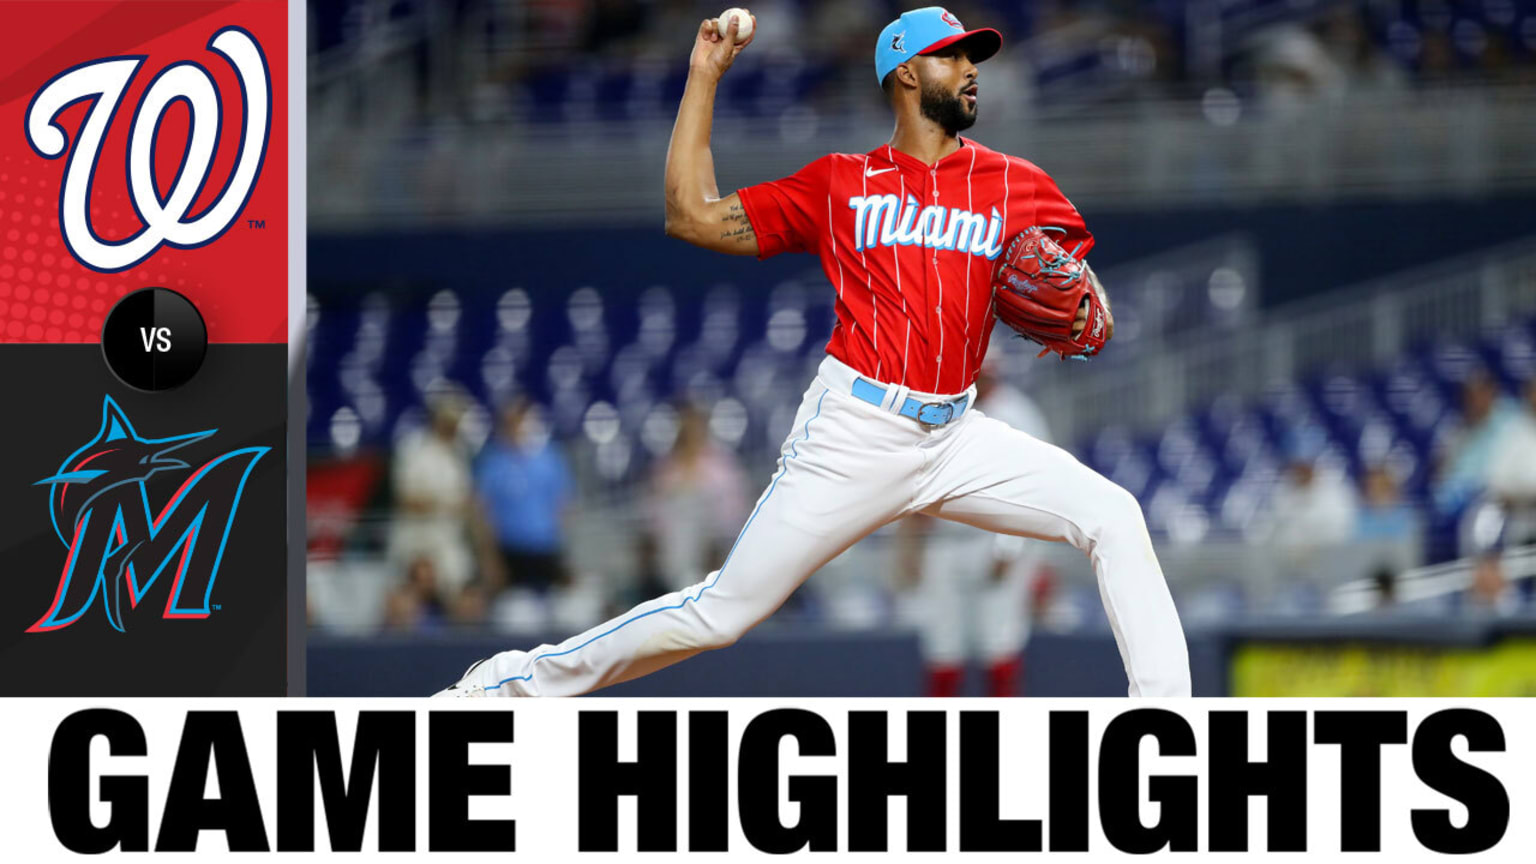 Nationals vs. Marlins Box Score - August 22, 2020 - The Athletic